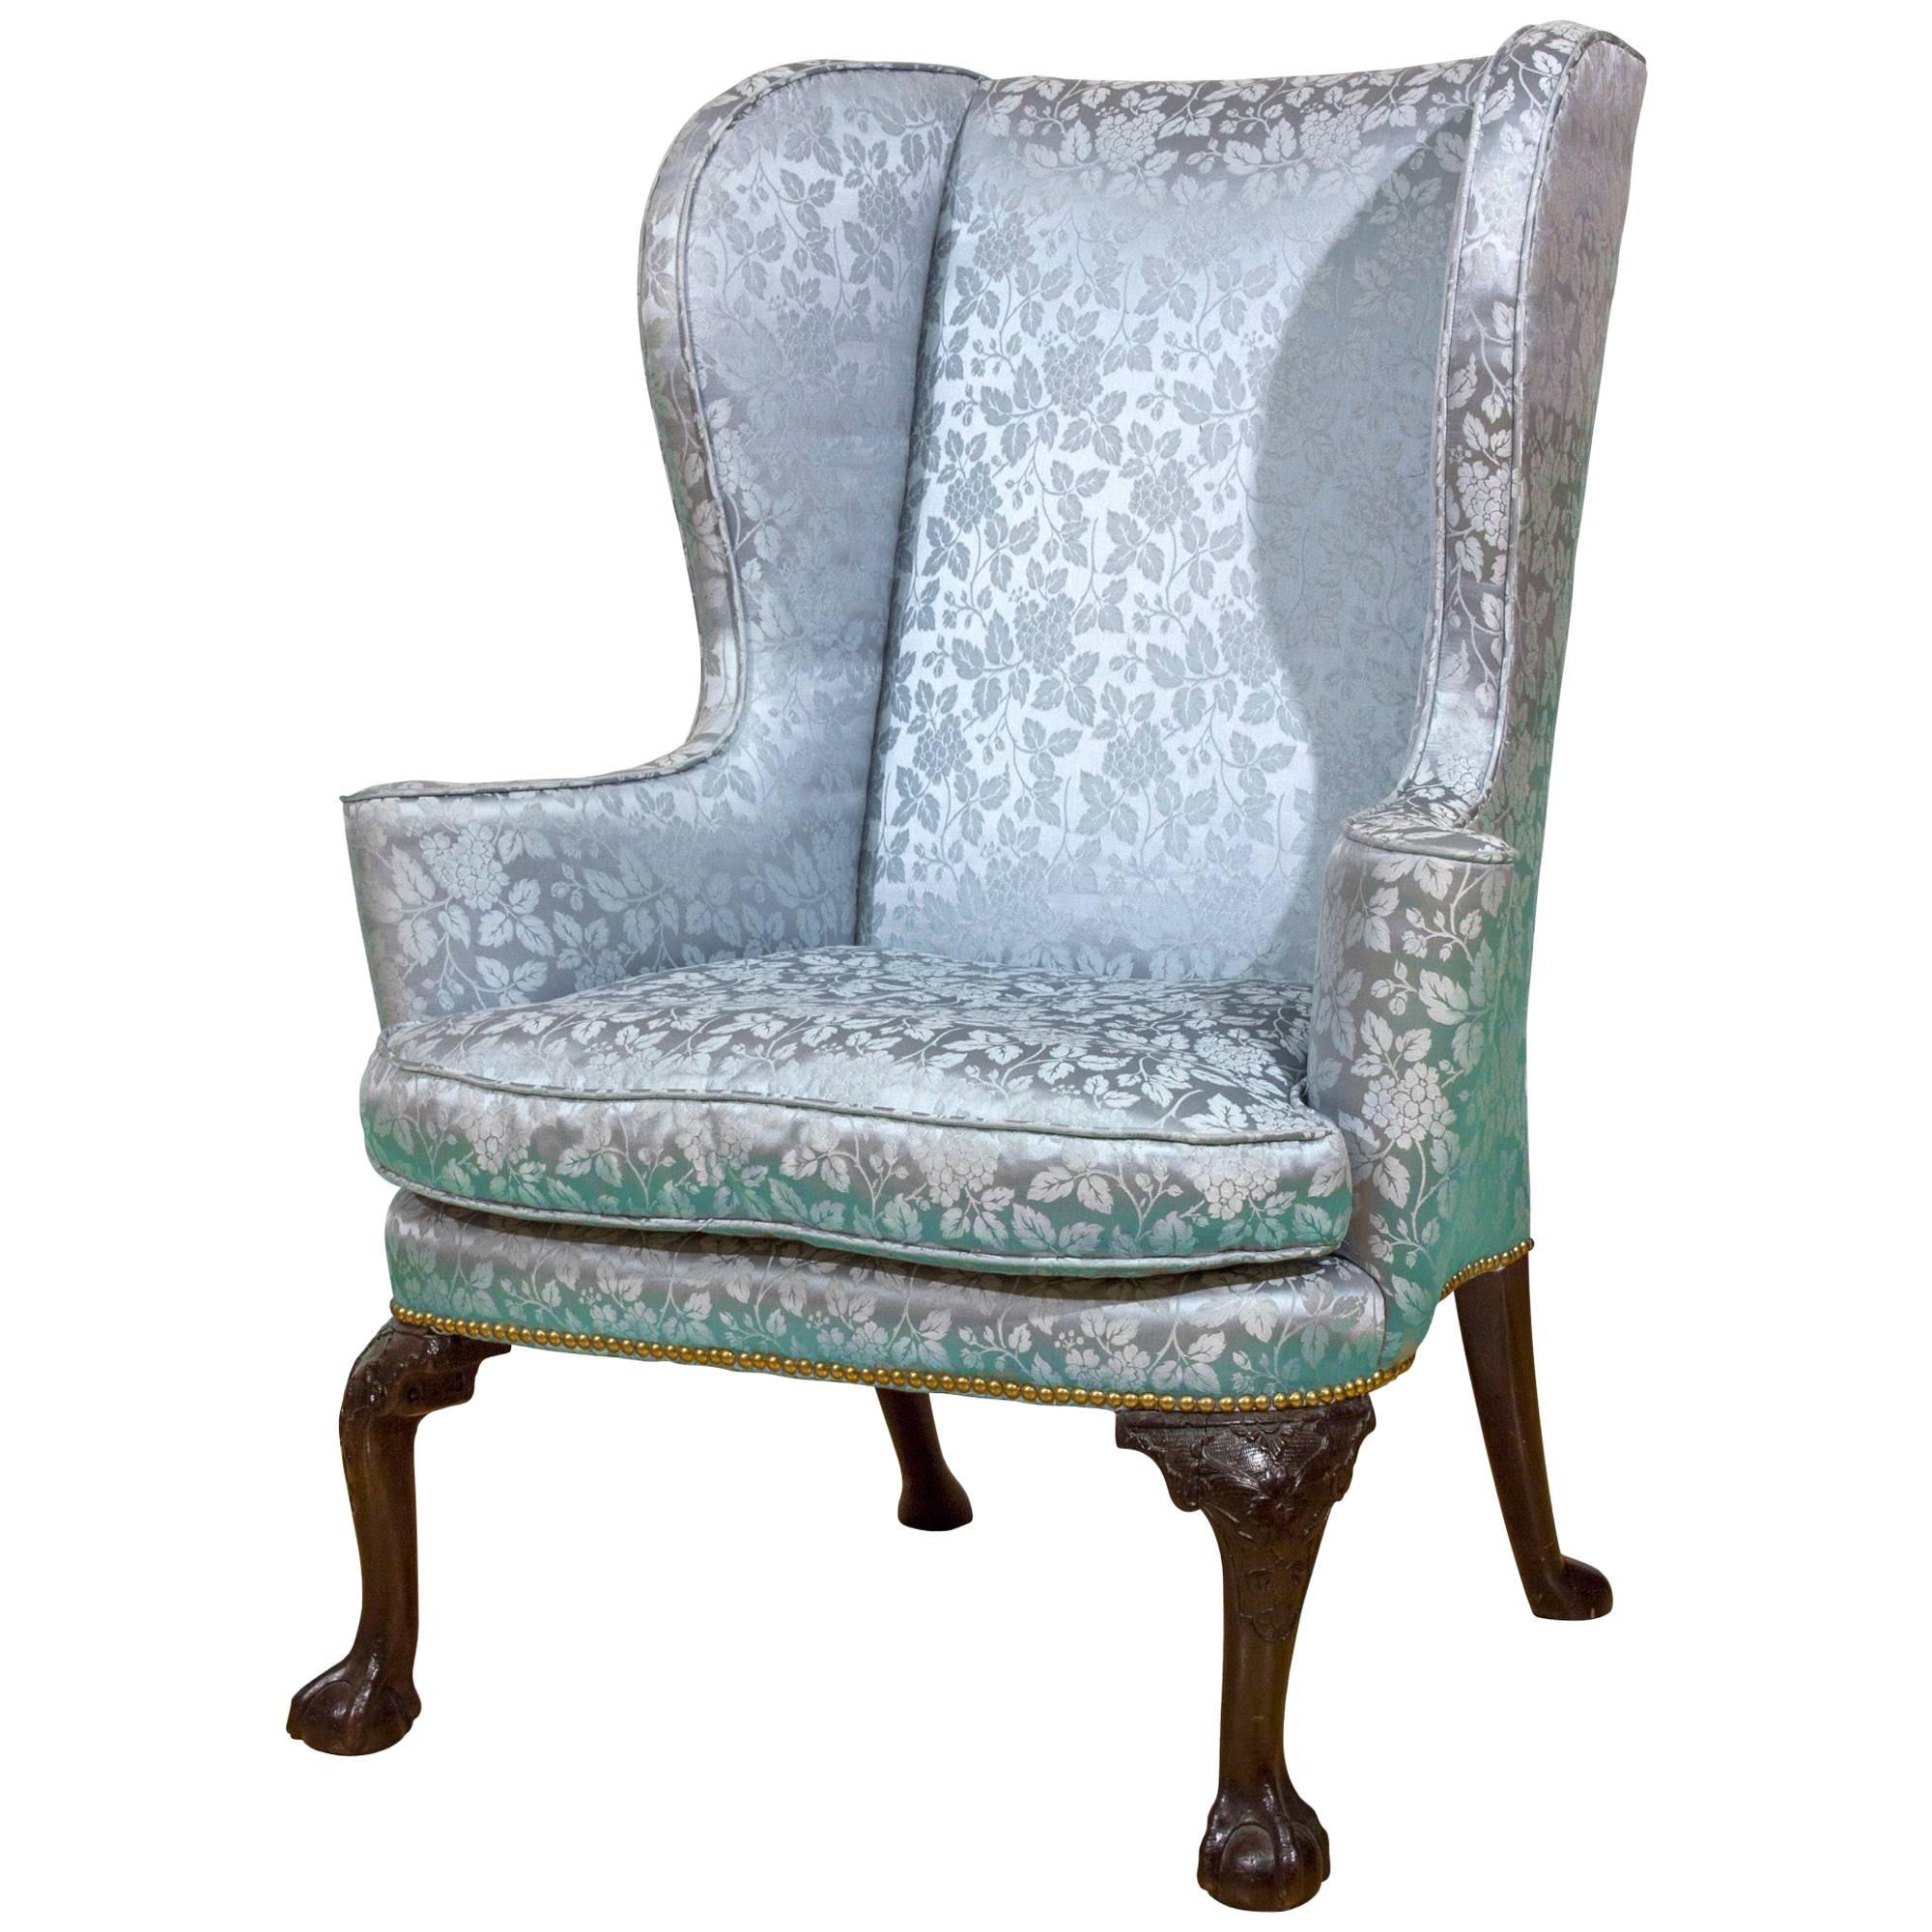 Queen Anne / George II Walnut Wing Chair with Carved Knees, Claw & Ball Feet For Sale